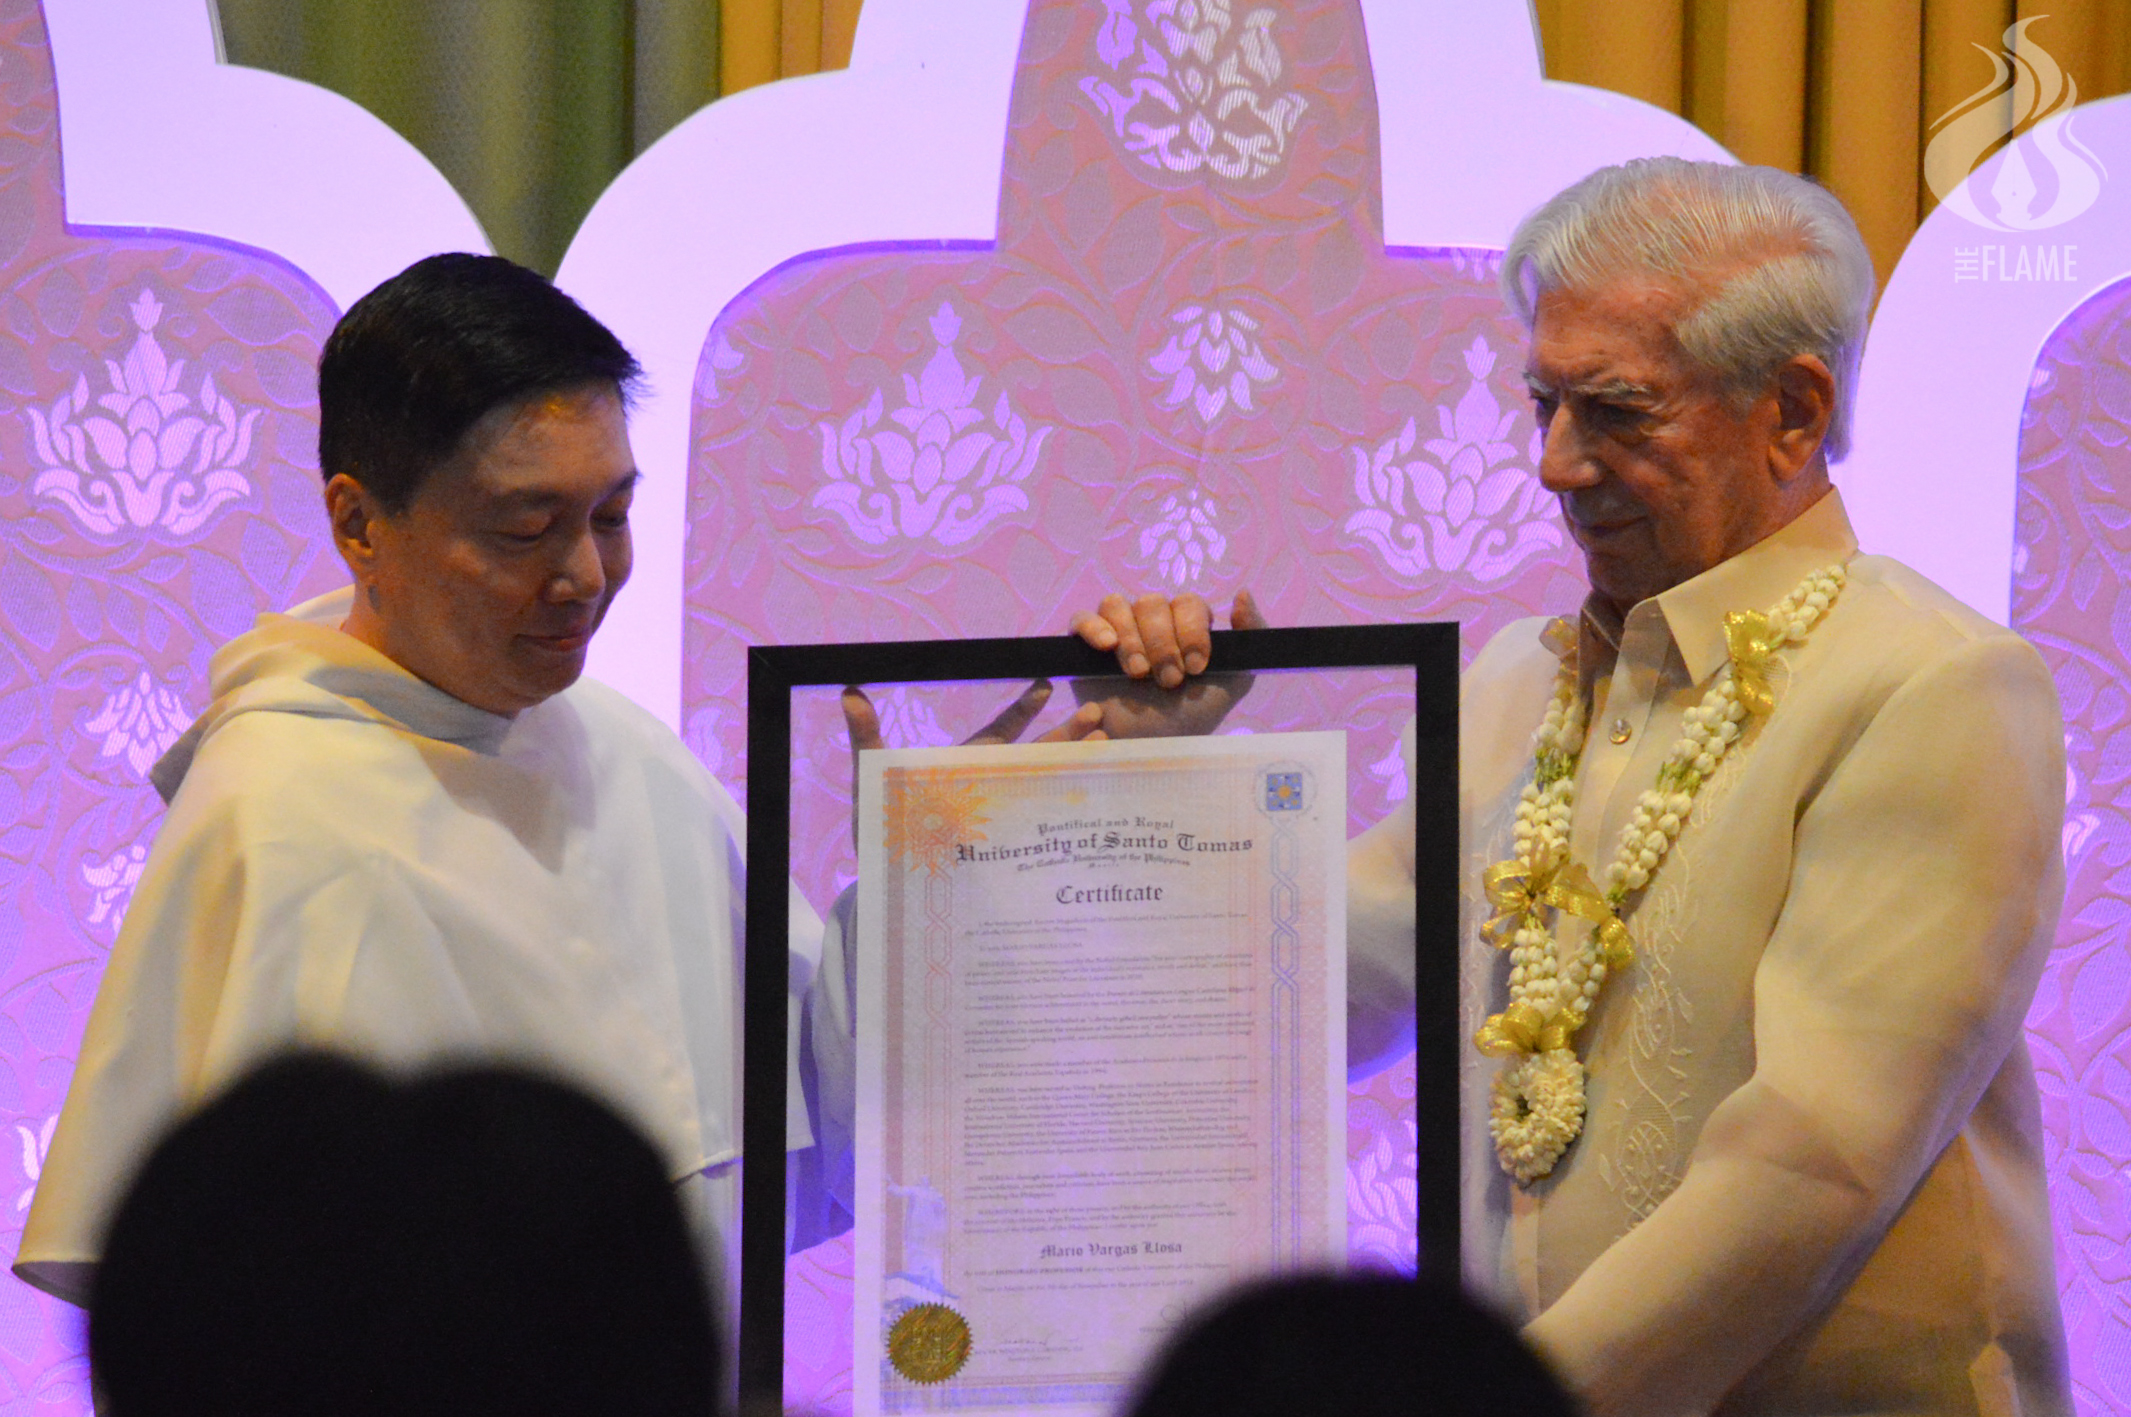 Vice Rector Rev. Fr. Richard Ang, O.P. awards the title of Honorary Professor to Nobel laureate Mario Vargas Llosa Monday, Nov. 7. PHOTO BY JANINE C. PEREA